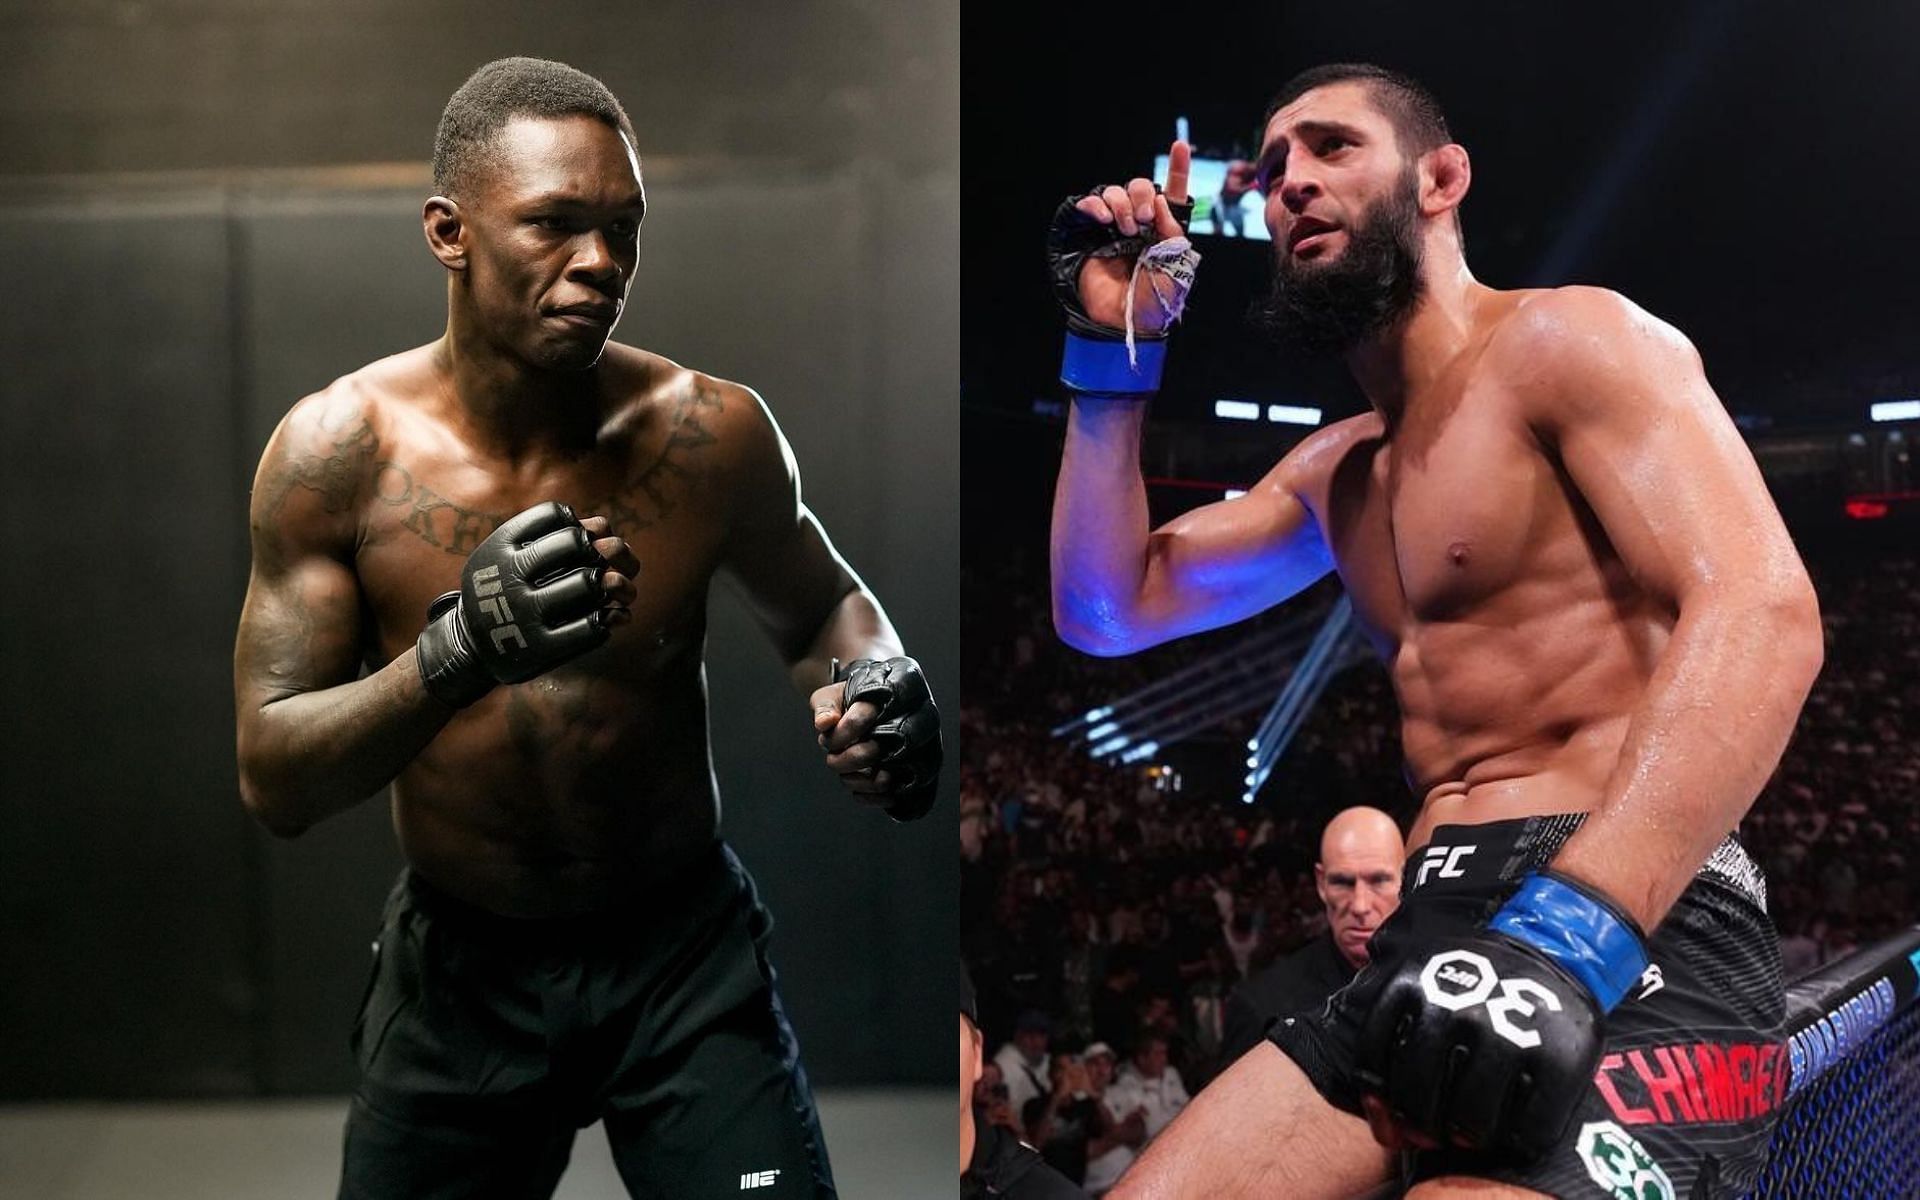 Israel Adesanya (left) and Khamzat Chimaev (right) have long been at odds with one another [Images courtesy: @stylebender and @khamzat_chimaev on Instagram]